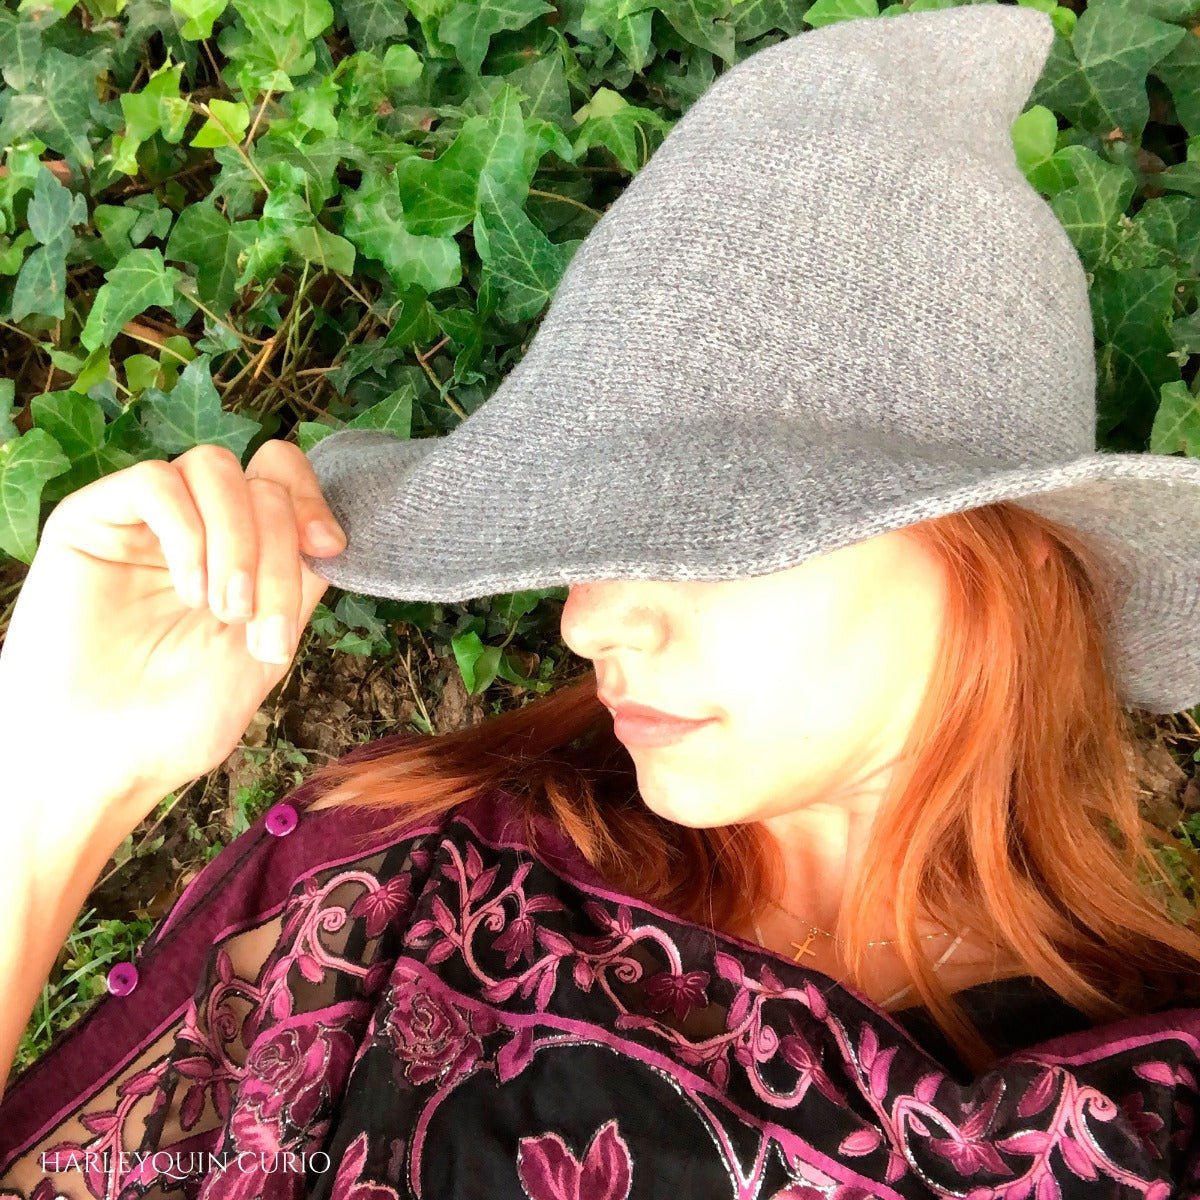 Grey Wool Witches Hat - 13 Moons